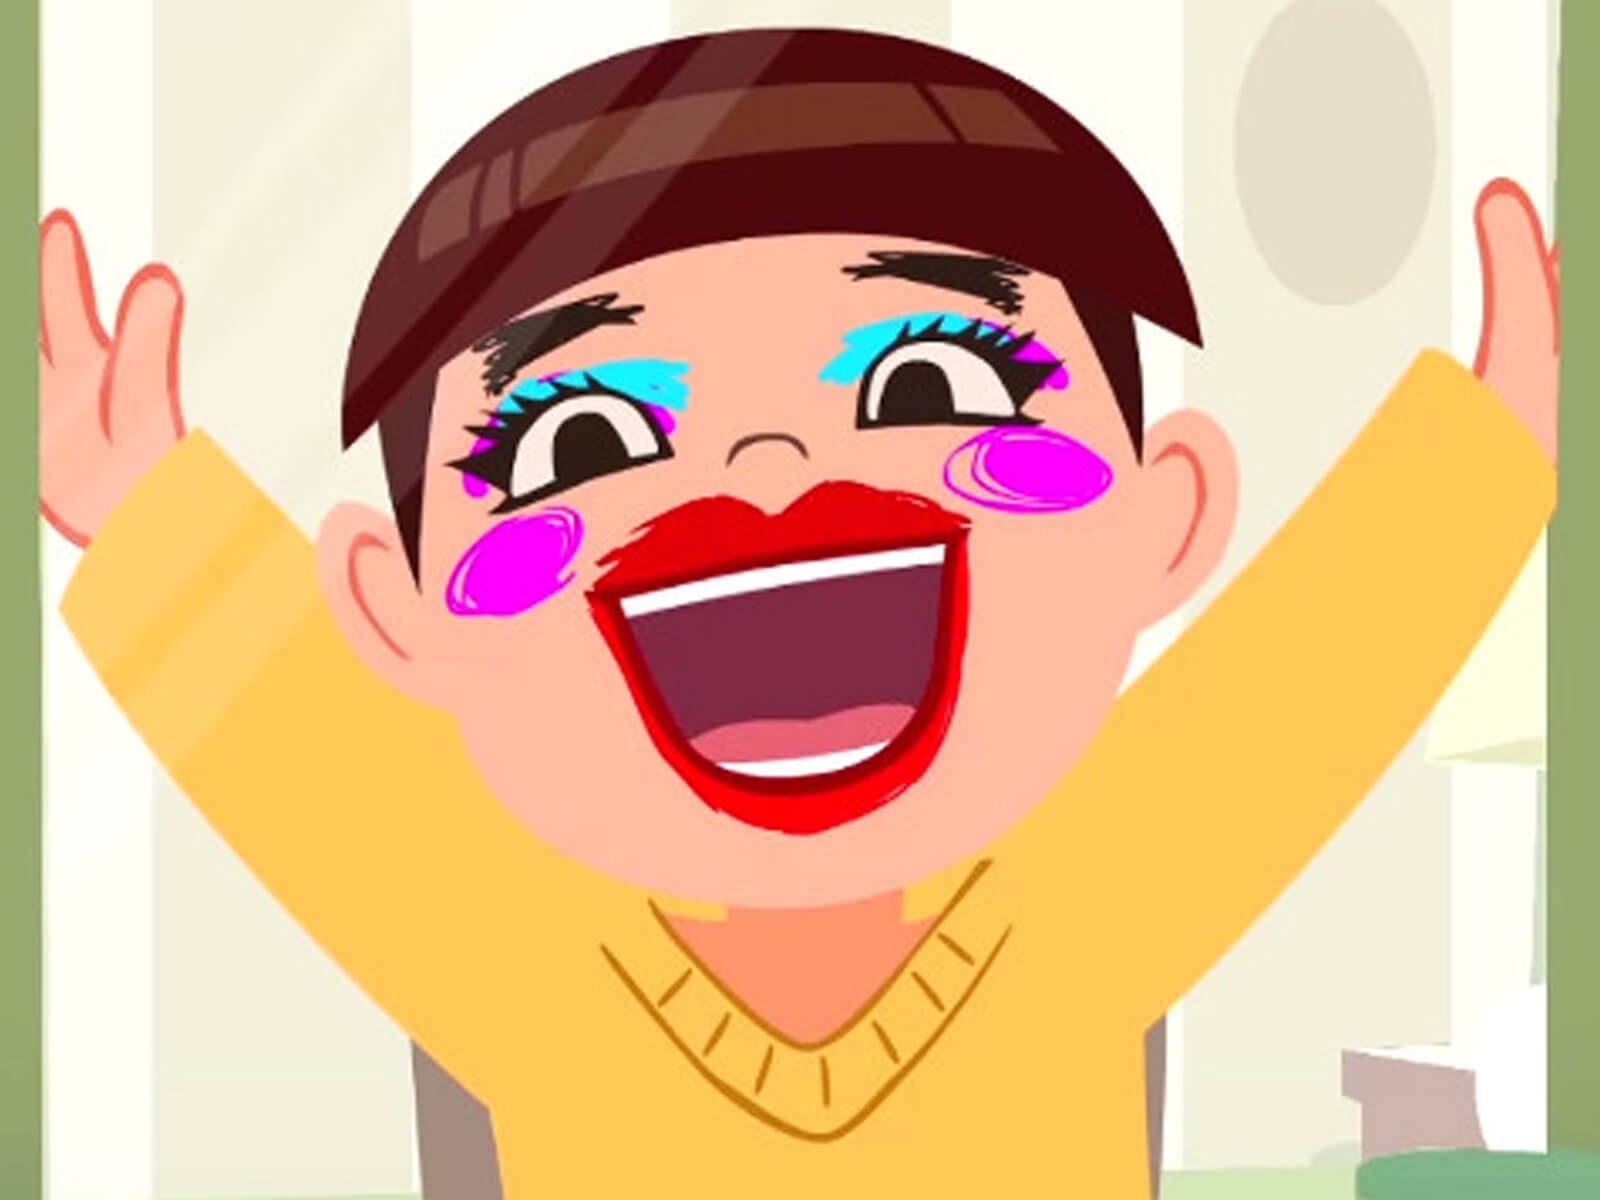 Still screen of 2D animated girl in a yellow sweater opening a closet wearing bright red lipstick and pink mascara